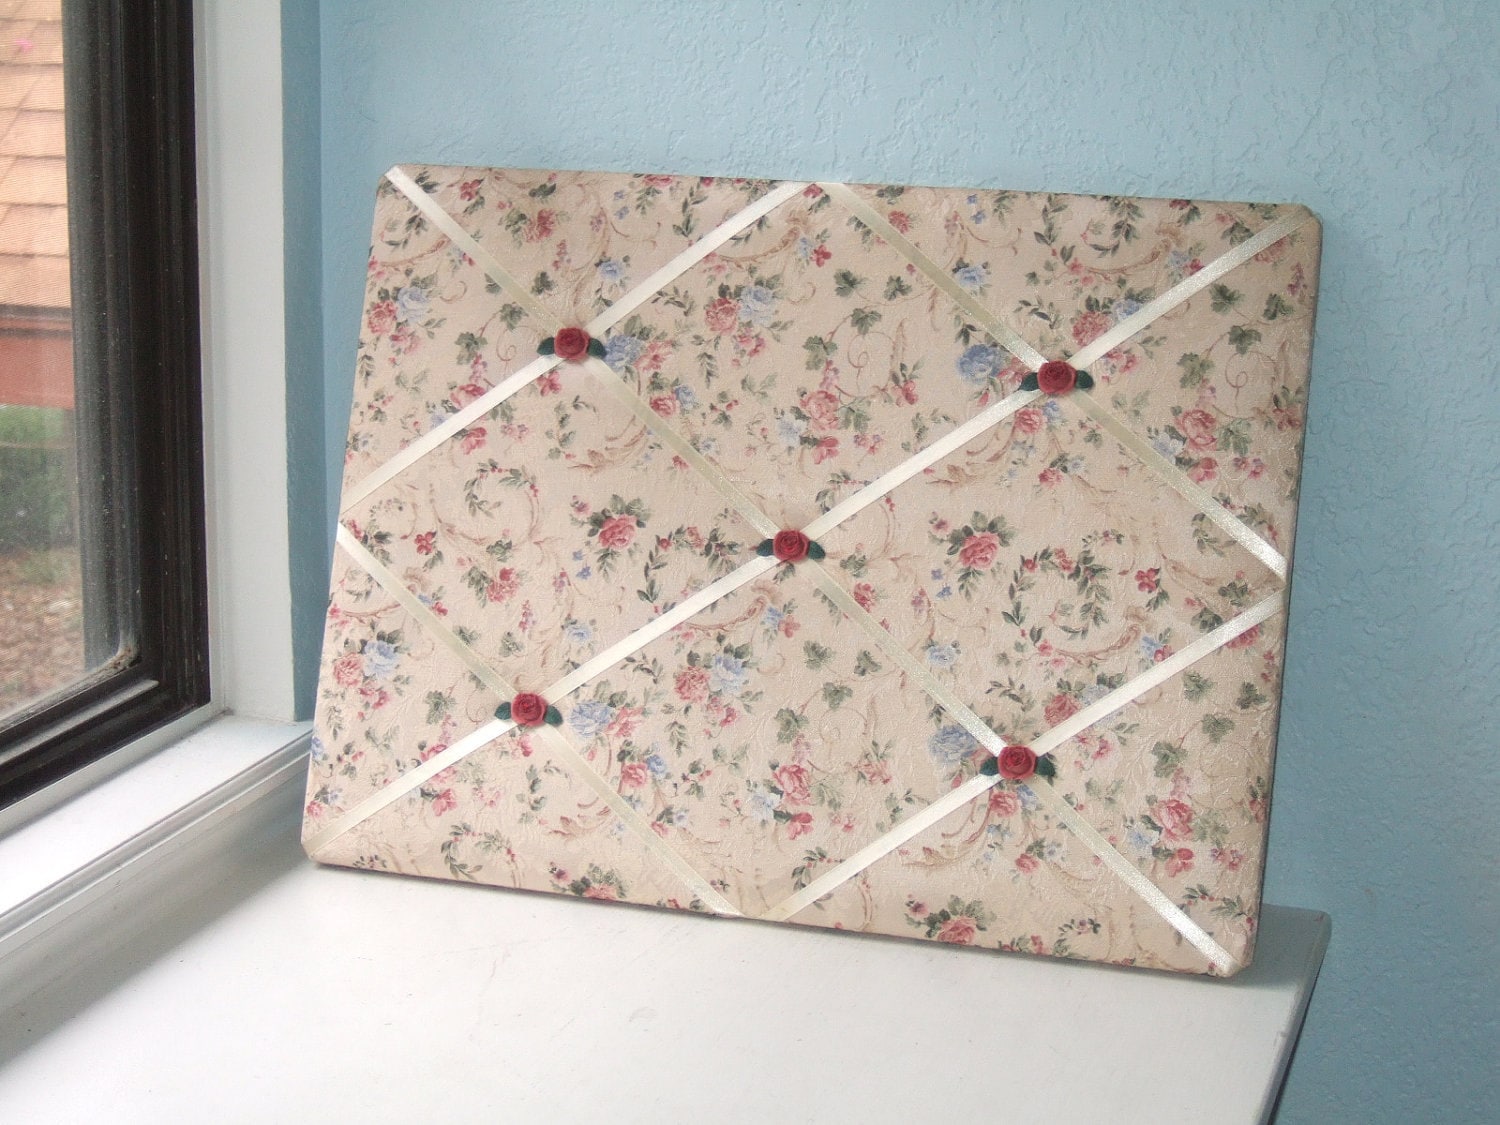 Large Fabric Memo Board by TheArtofChic on Etsy